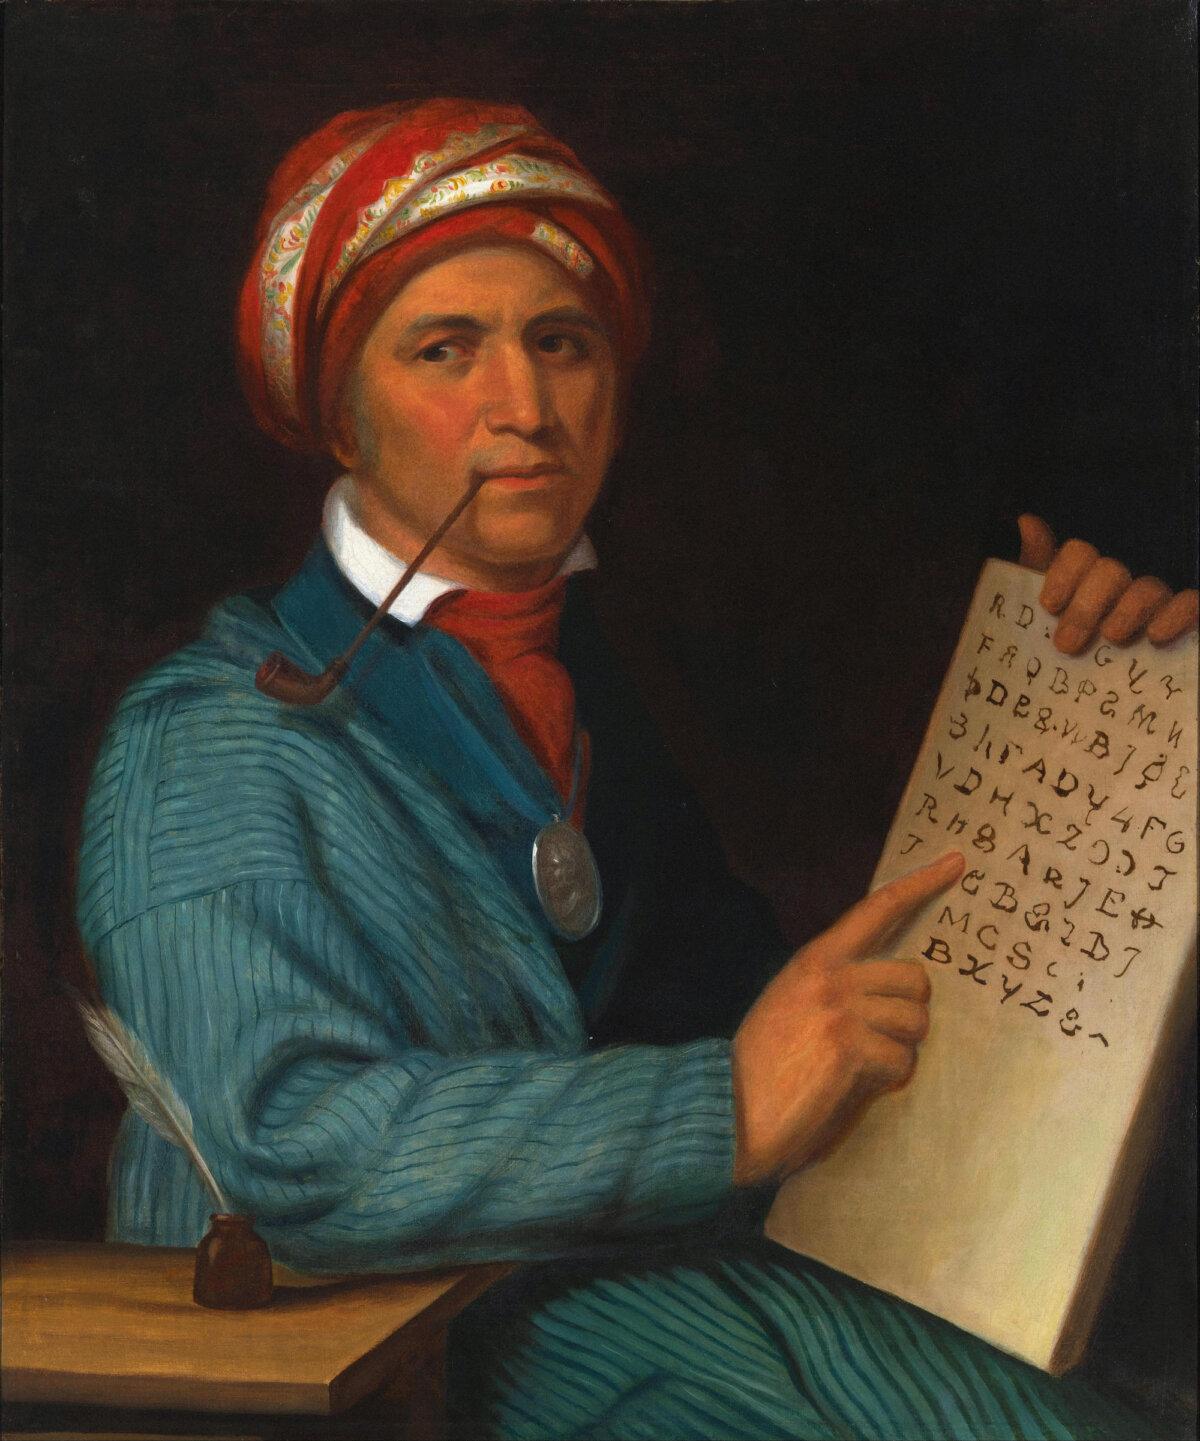 "Sequoyah," circa 1830, by Henry Inman. Oil on canvas; 30 1/4 inches by 25 1/4 inches. National Portrait Gallery, Washington. (Public Domain)